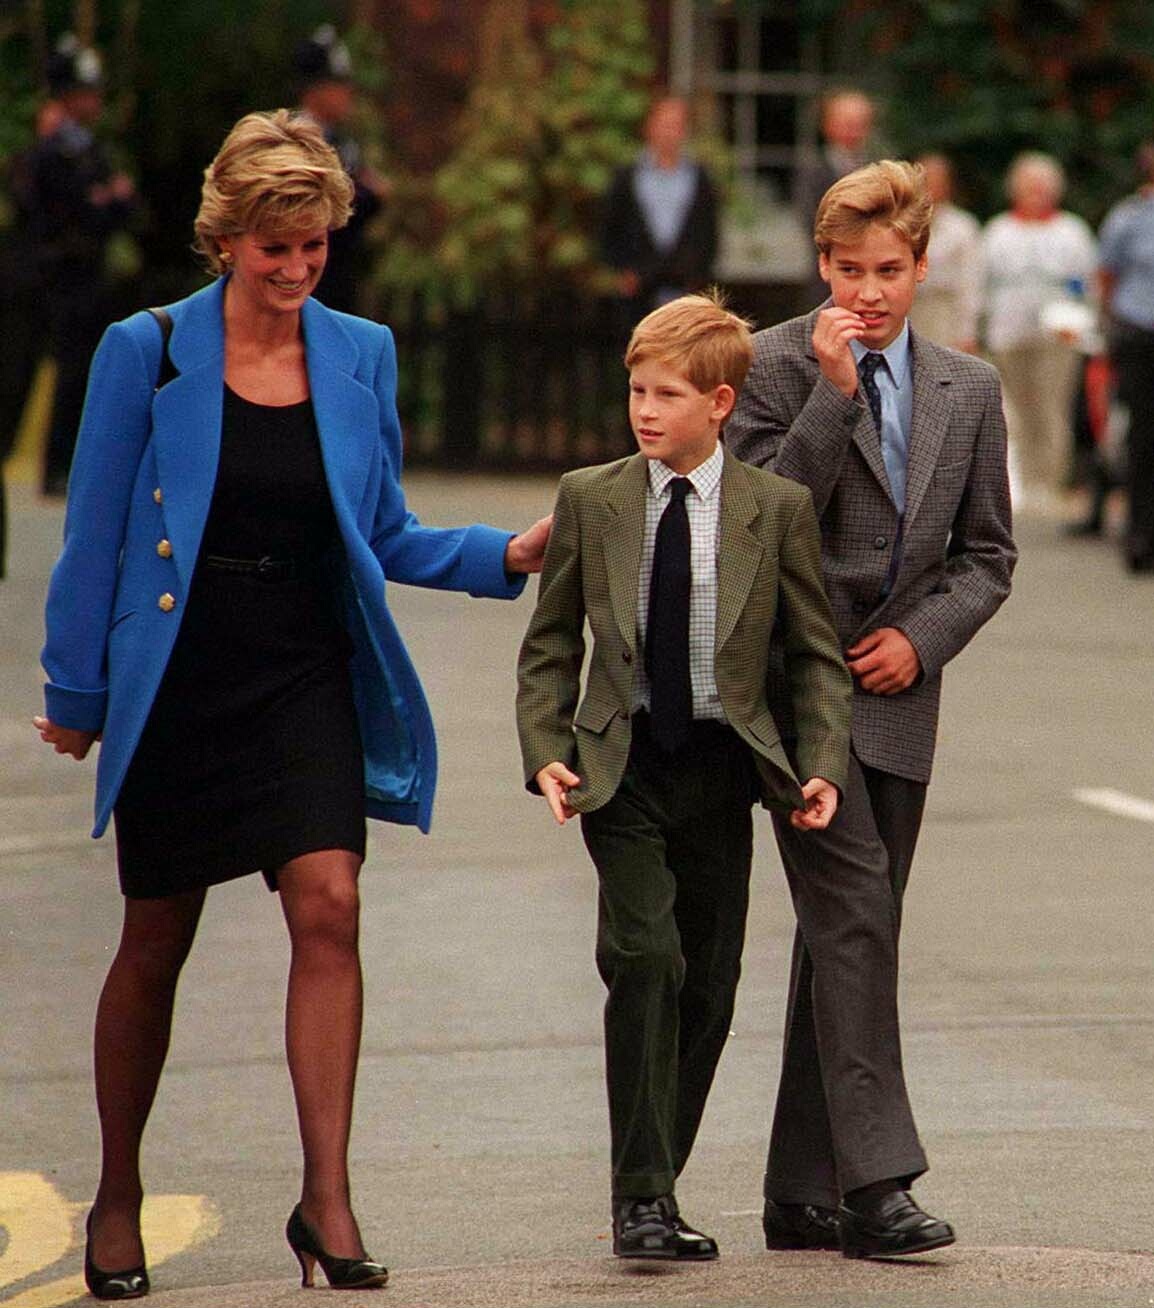 Prince William has been paying a secret tribute to Diana under his suits & uniform for 30 years – have you seen it?